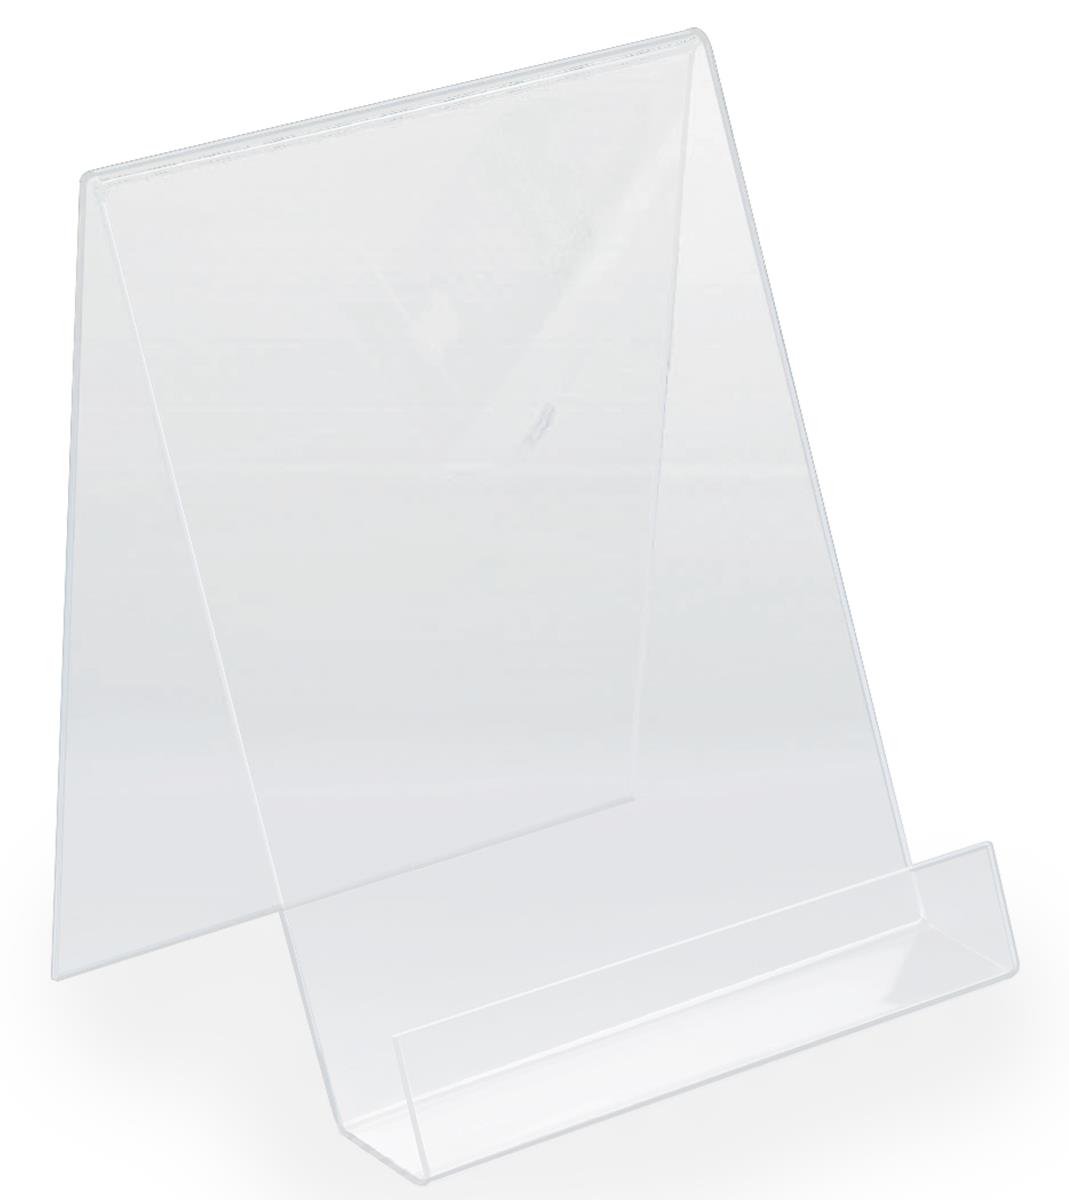 wage Transformer Volcano Acrylic Magazine Holder for Tables | Slanted 8.5 x 11 Flyer Display